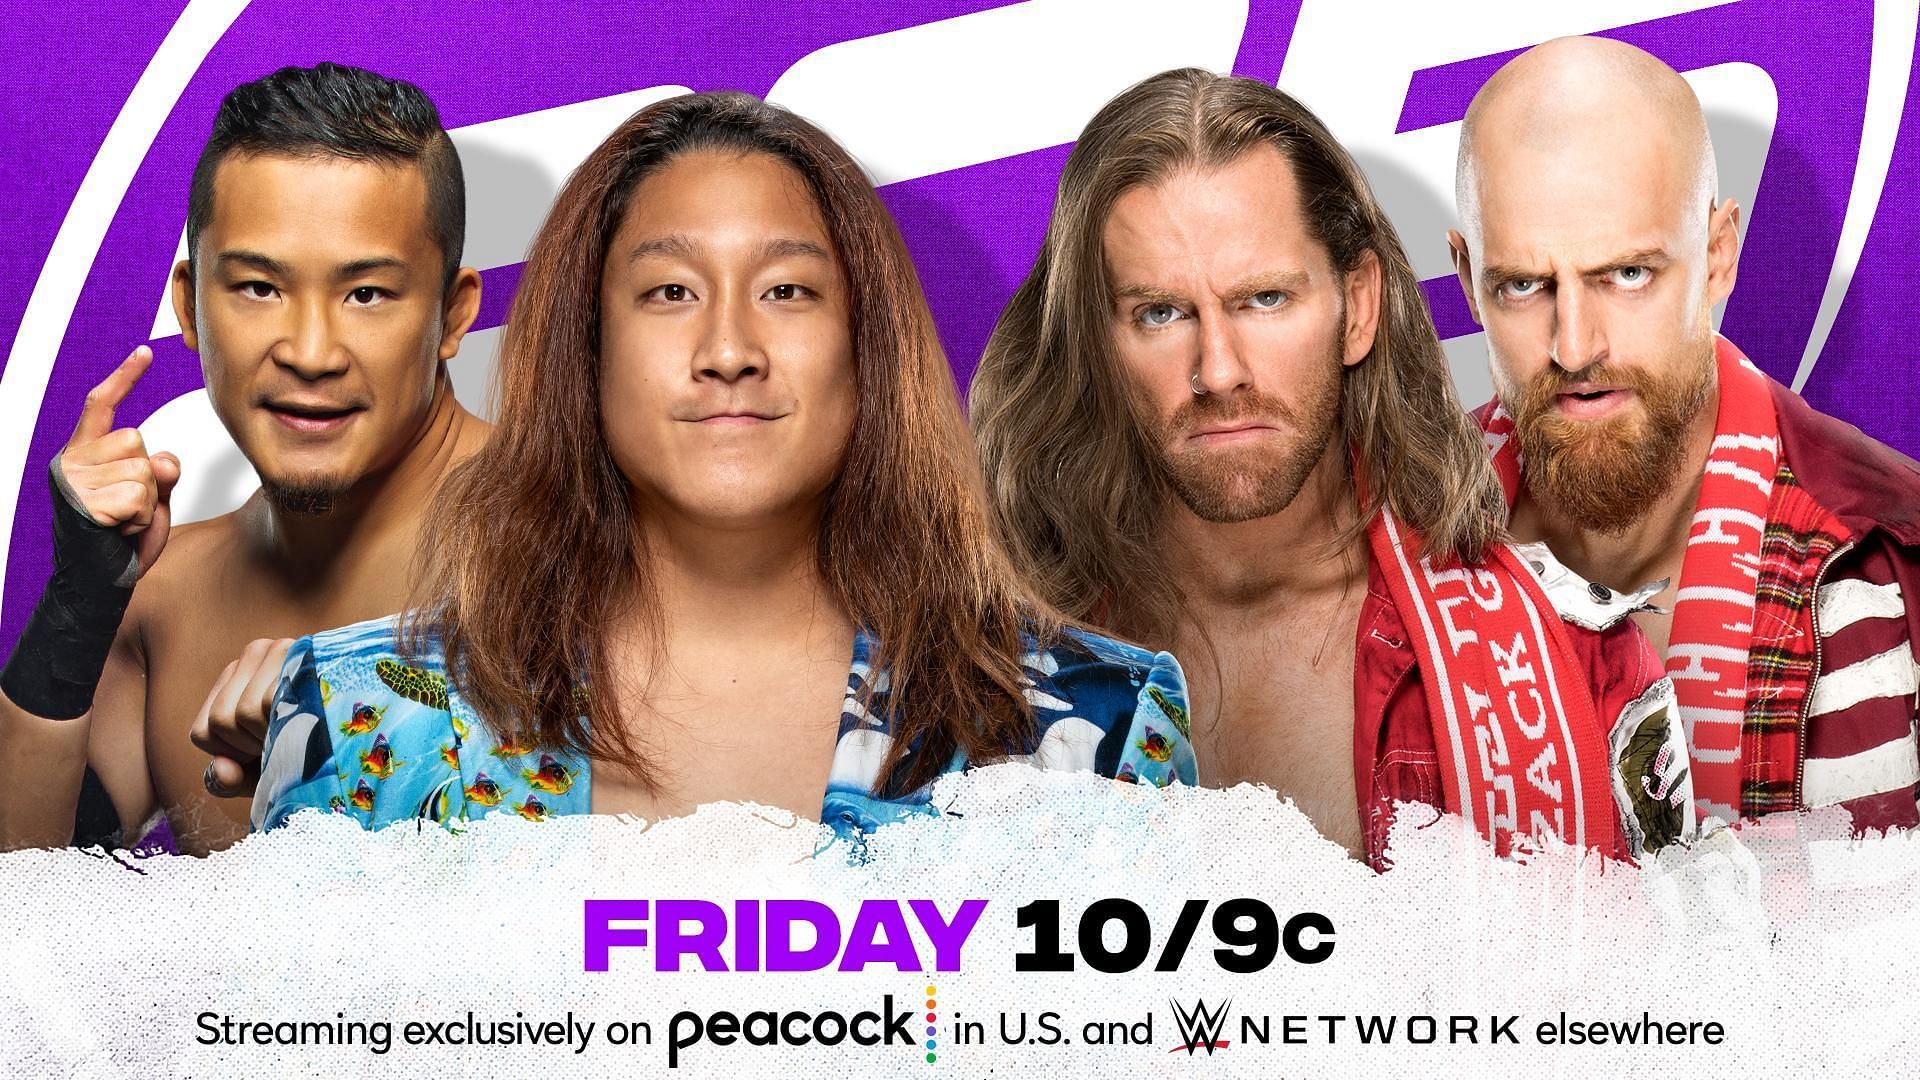 A star-studded edition of 205 Live